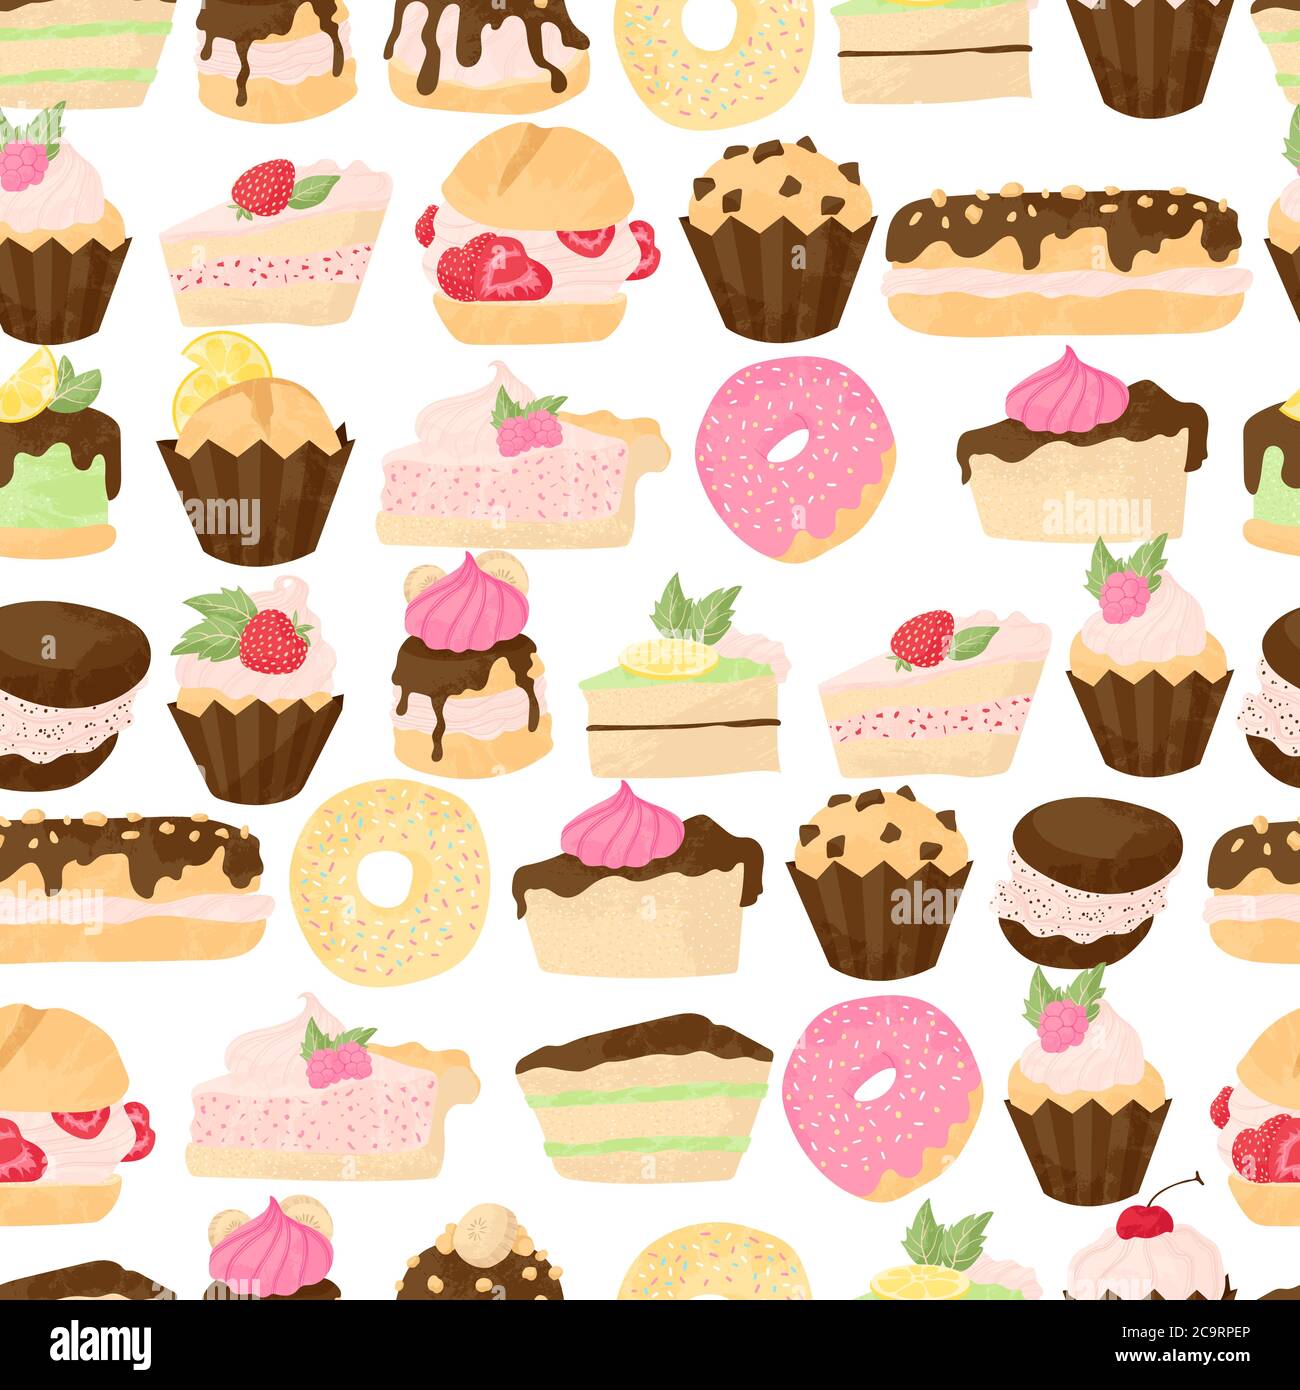 Vector pastry seamless pattern with cakes, pies, profiterole, muffins, cupcakes and eclair with chocolate, fruits and berries. Hand drawn sweet bakery Stock Vector